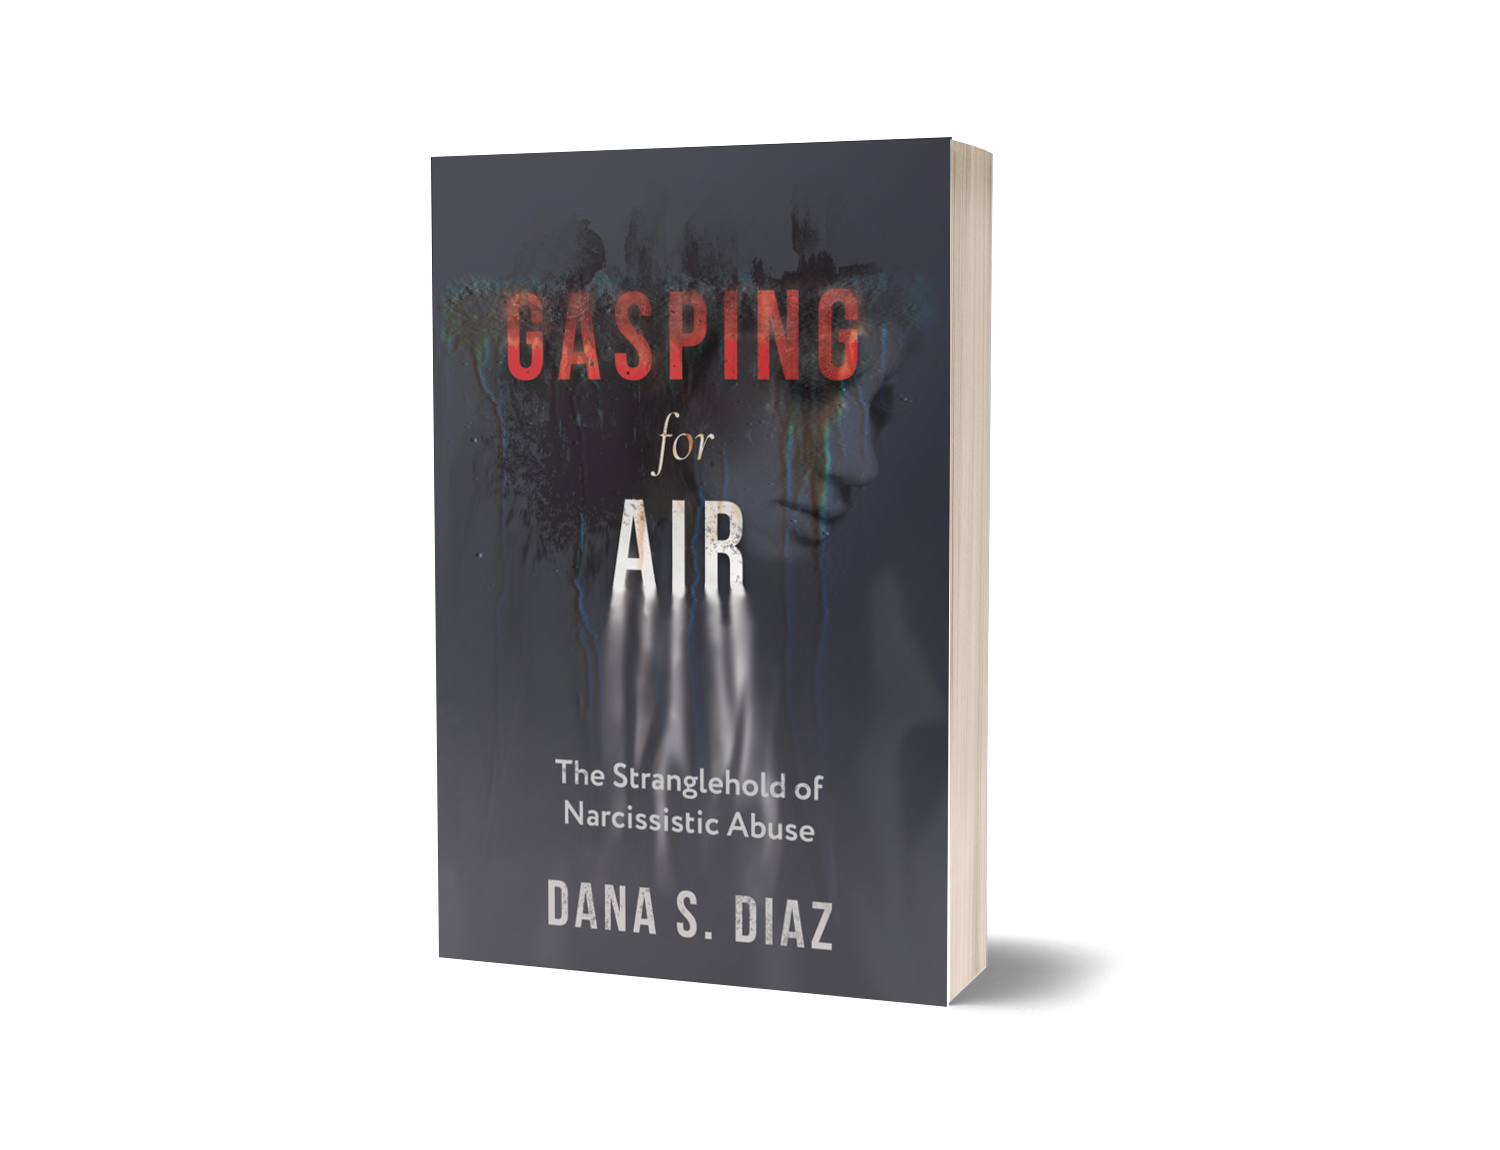 Book Cover: Gasping for Air by Dana S. Diaz